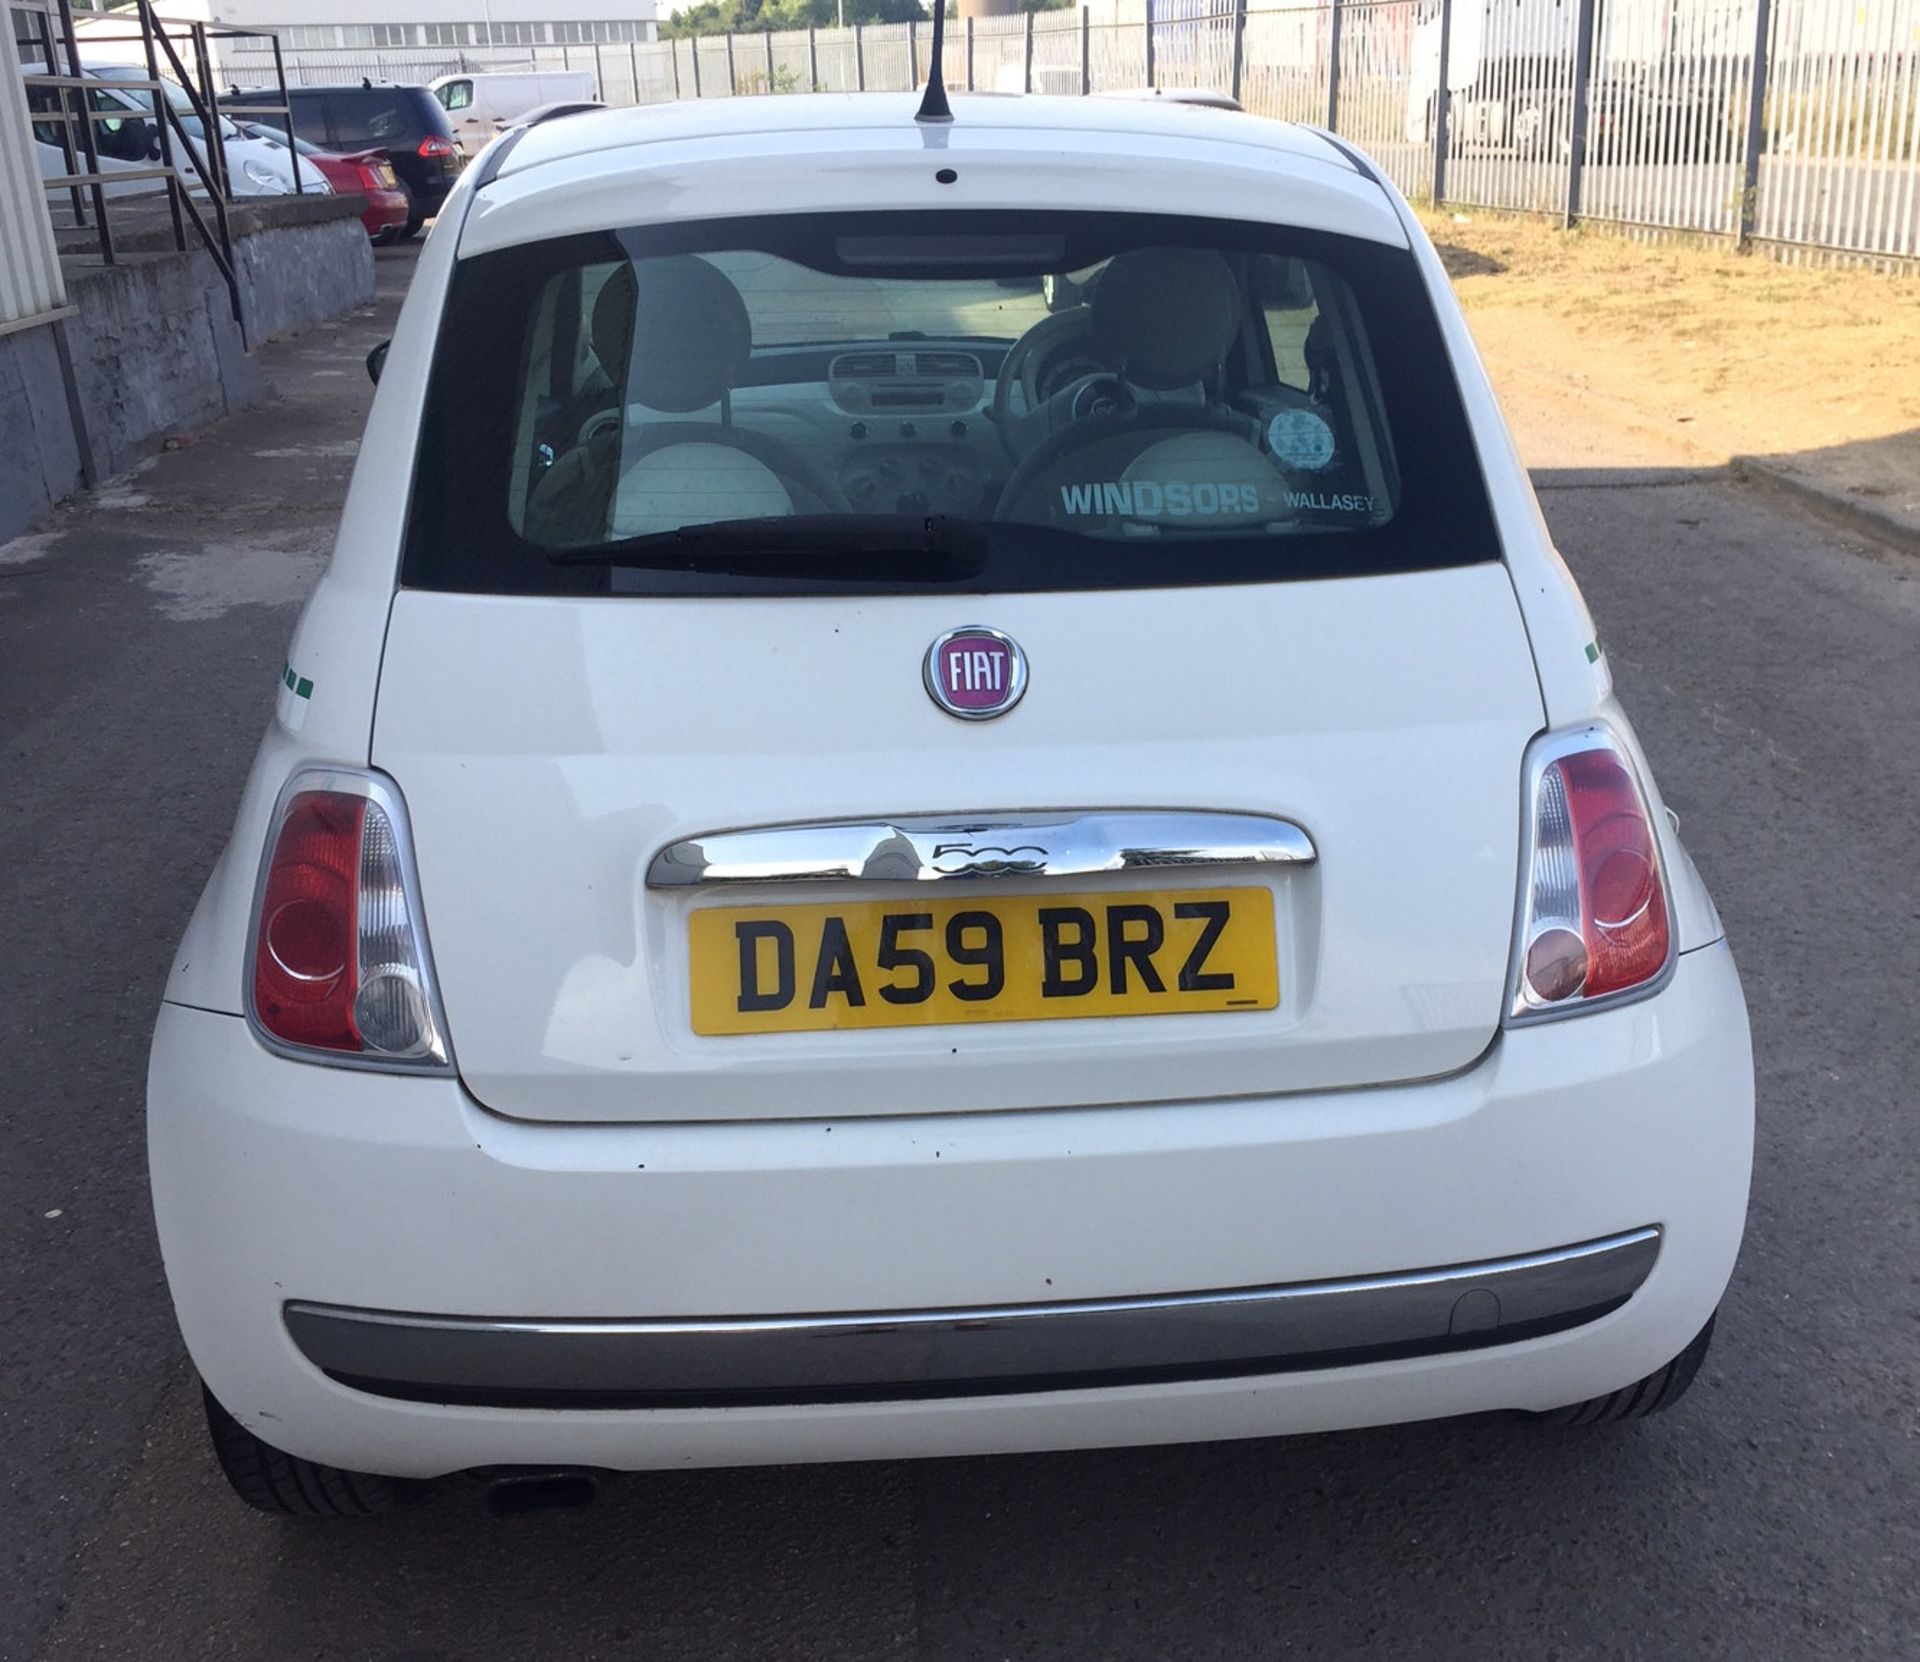 2009 Fiat 500 1.2 Lounge 3 Dr Hatchback - CL505 - NO VAT ON THE HAMMER - Location: Corby, Northampto - Image 8 of 12